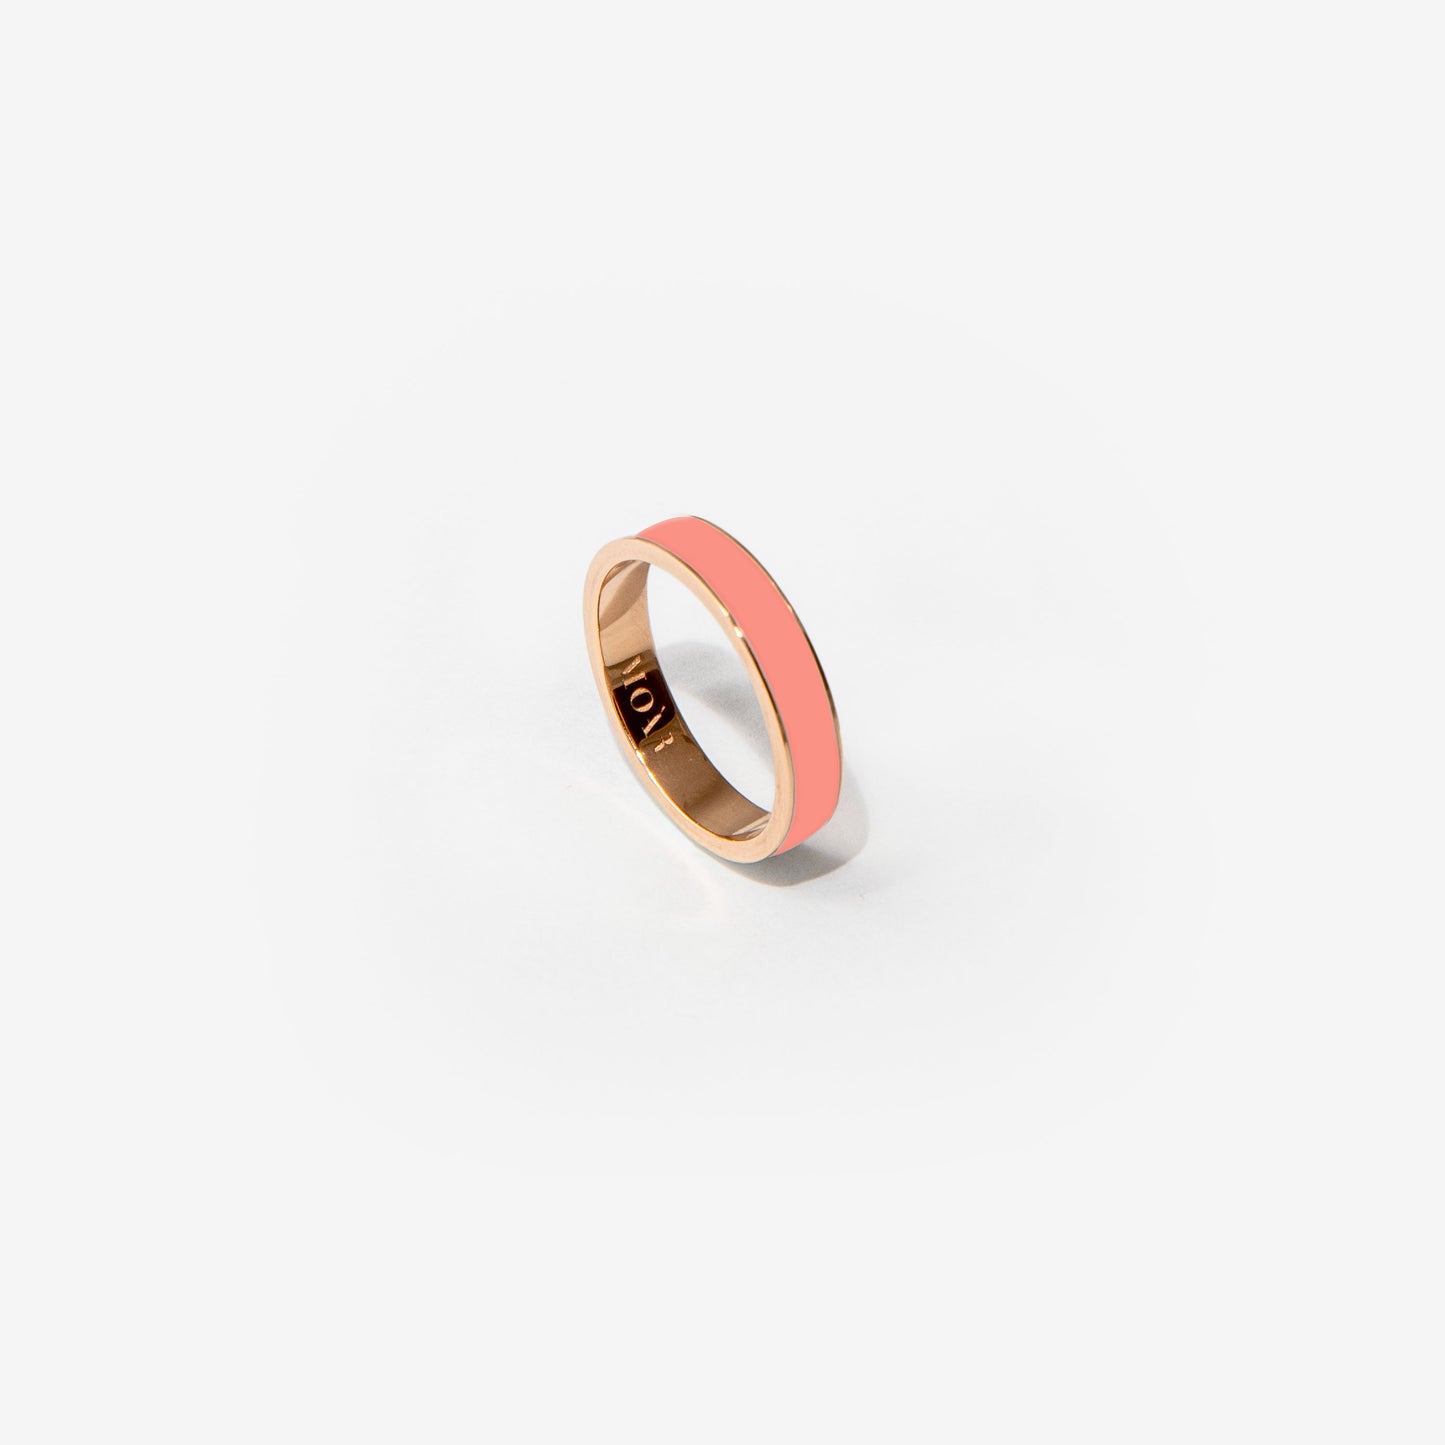 Veretta in gold and salmon pink enamel